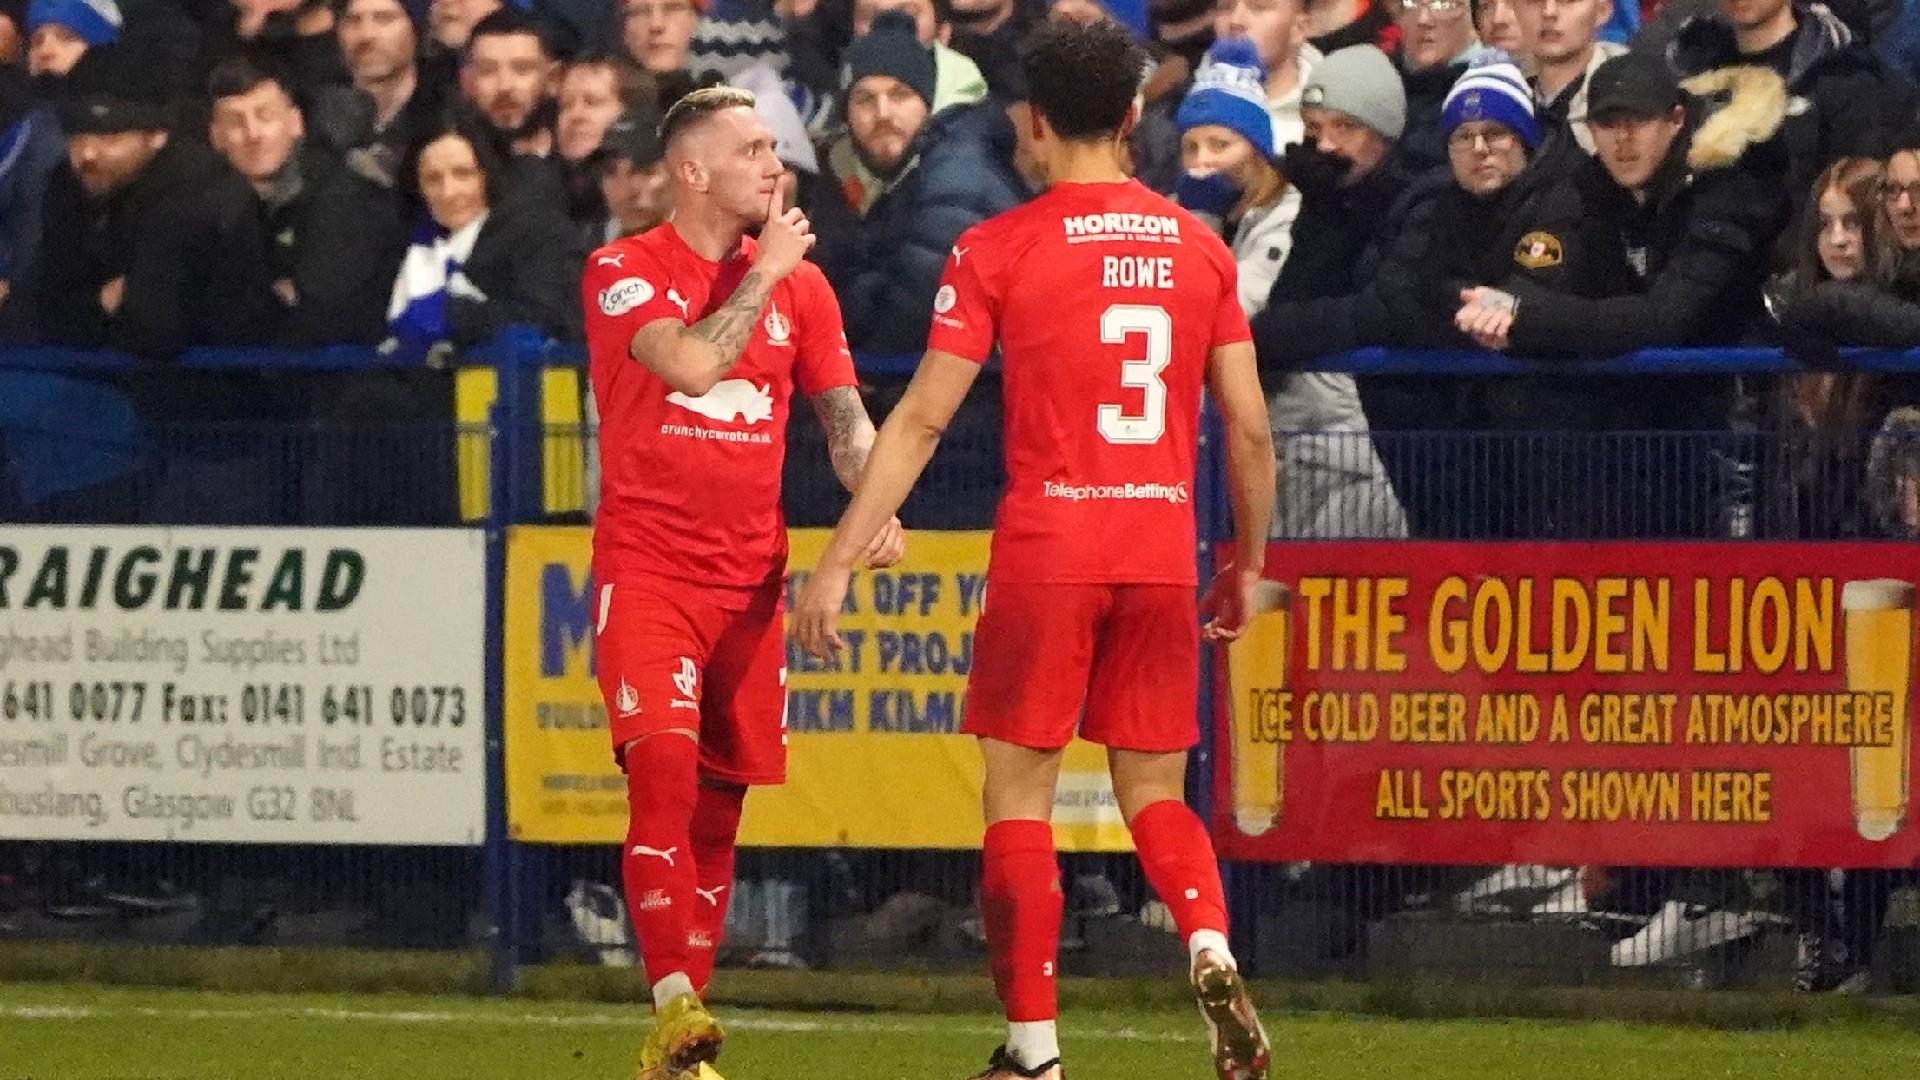 Falkirk in seventh heaven after late winner at Montrose